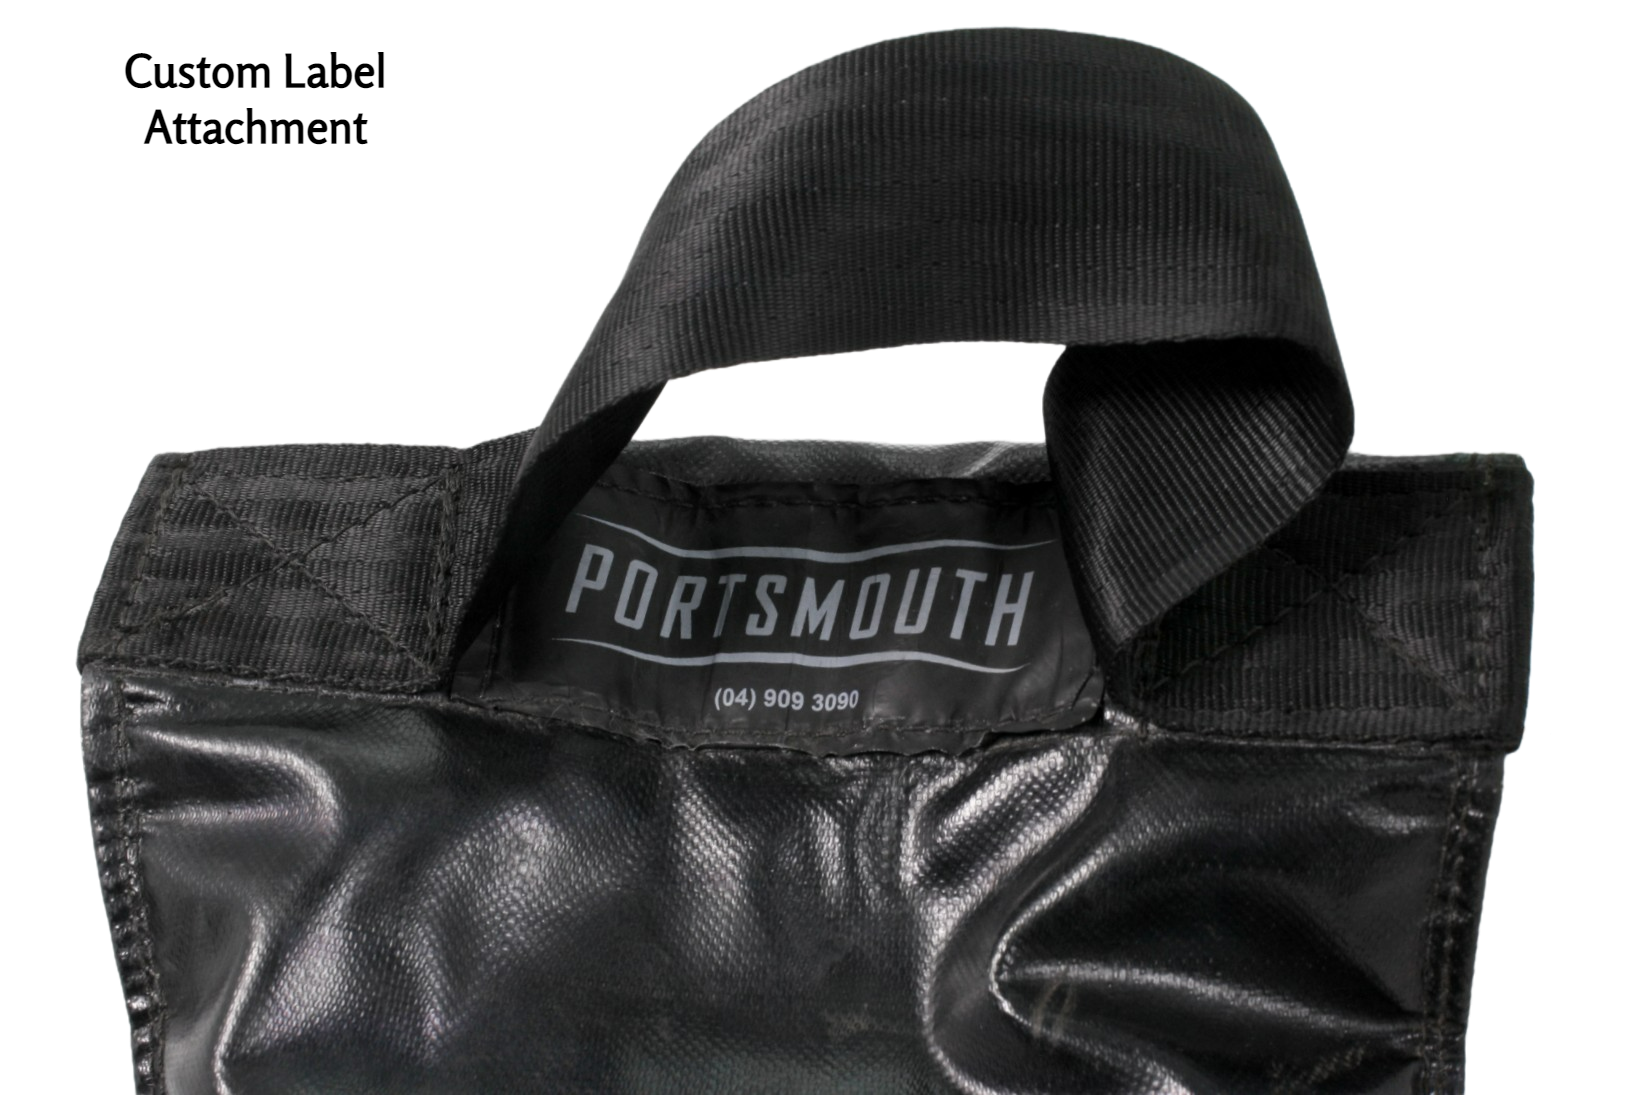 An example of a custom logo stitched onto the sandbag at the top, between the handle anchors.